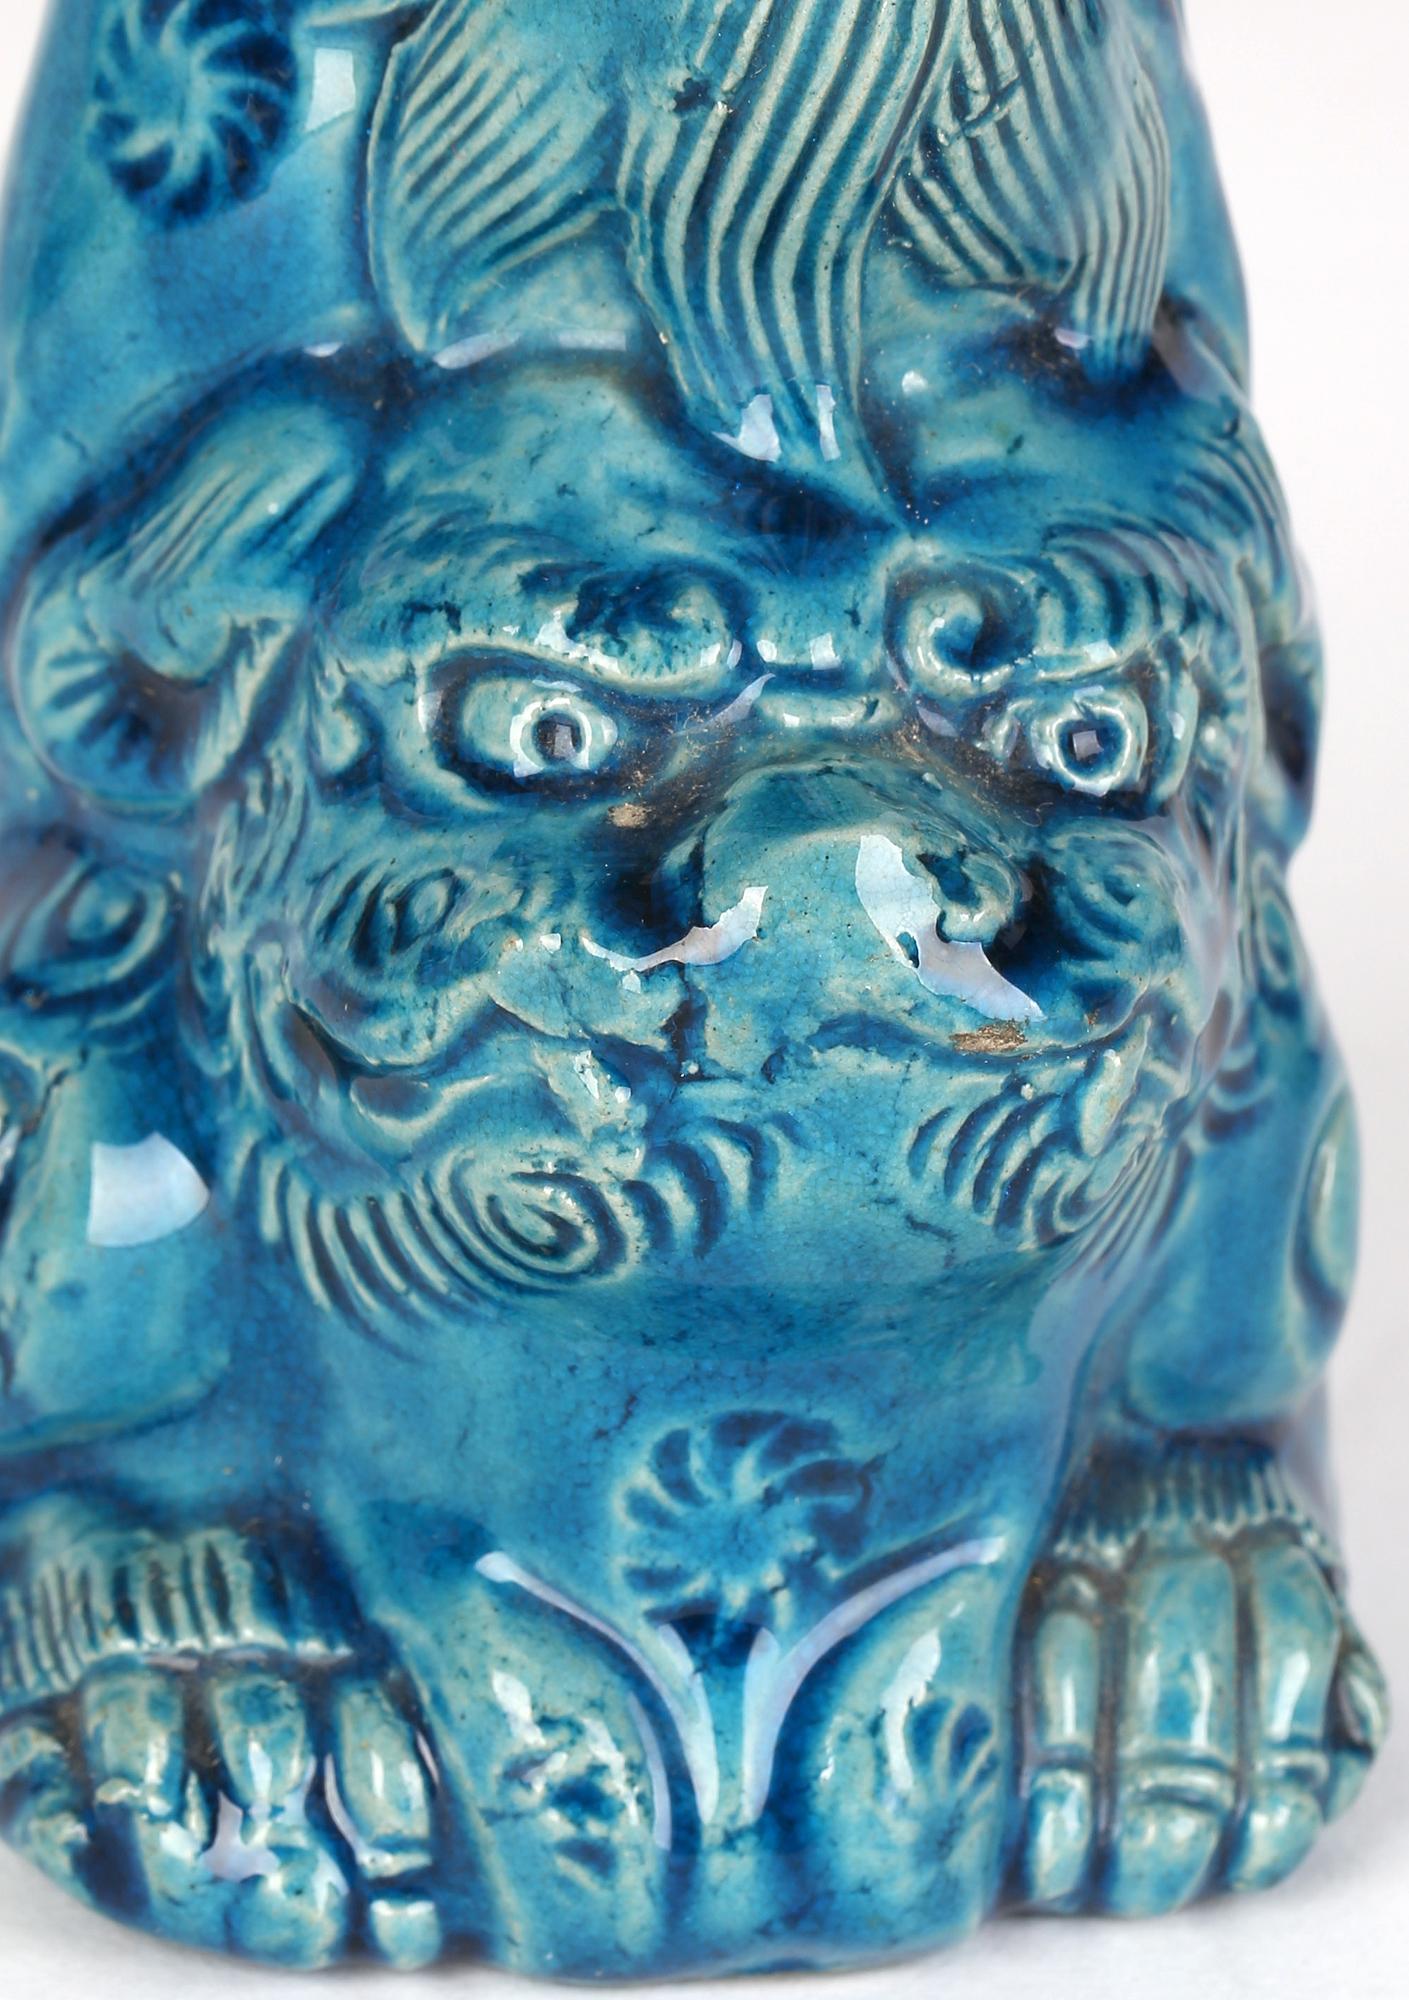 A stylish antique Chinese Qing porcelain vase modeled as a seated Foo Dog supporting an urn shaped vase on his hind legs dating from the 19th century. The vase is heavily pottery and well modeled with good detail and is decorated in turquoise